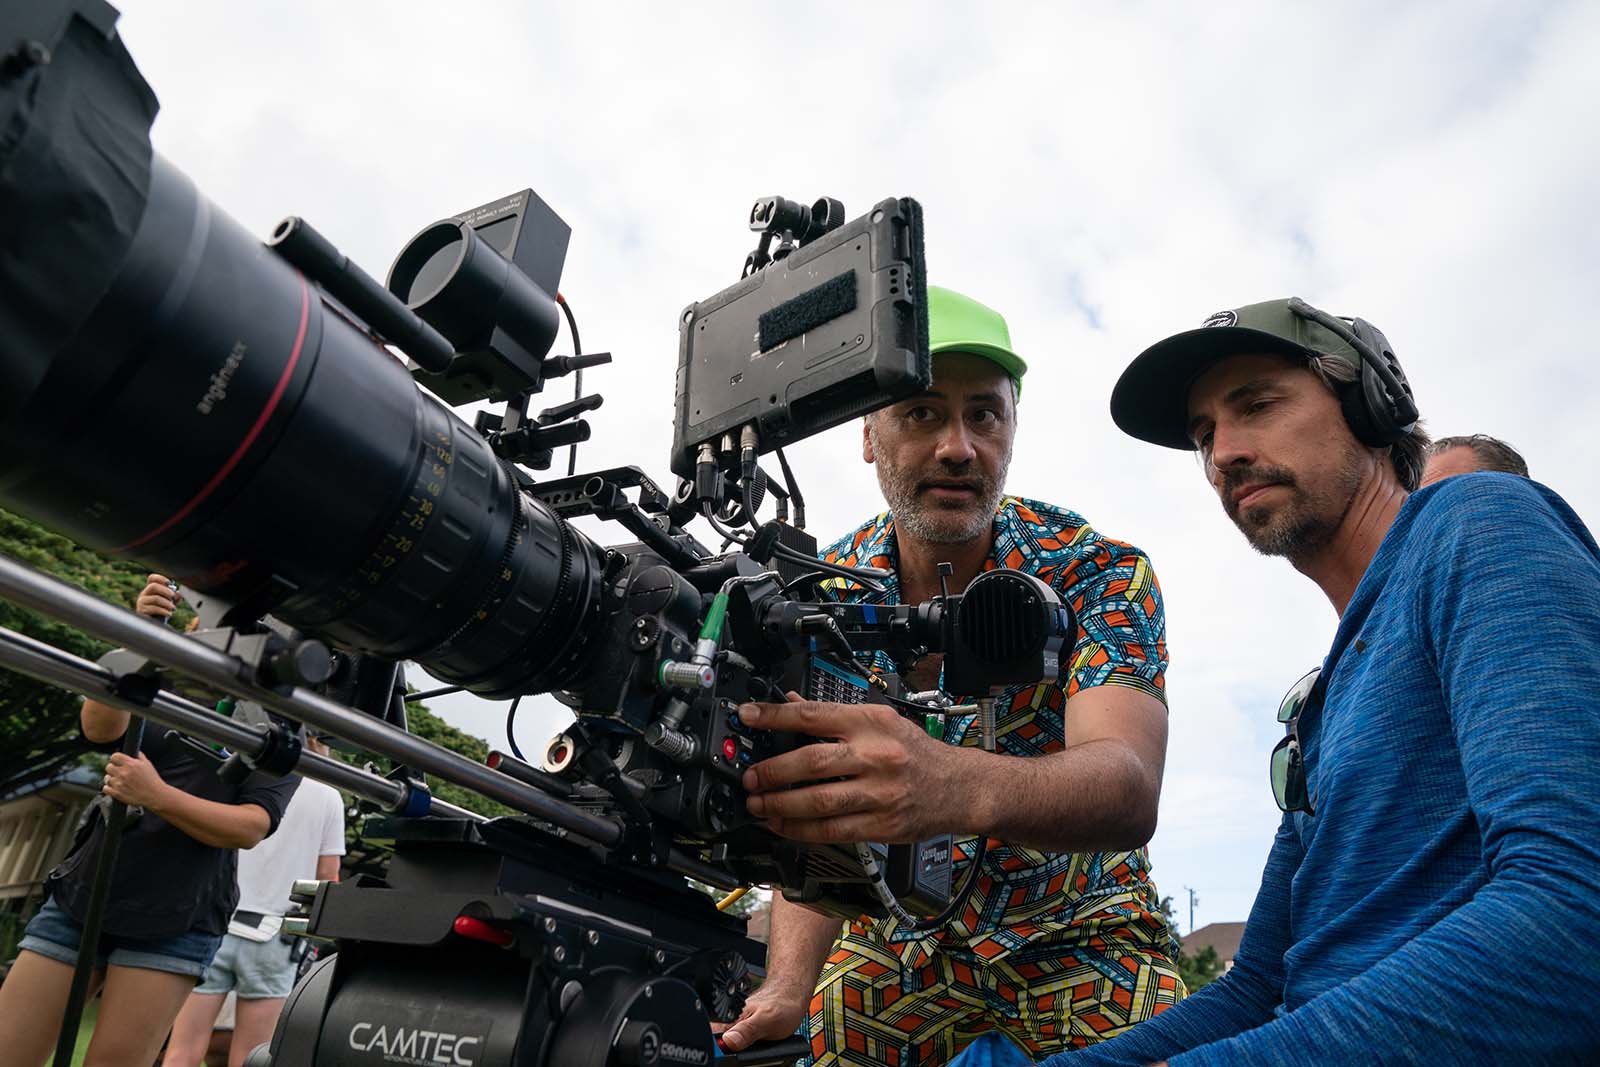 Director Taika Waititi on set with DP Lachlan Milne, ACS, NZCS.